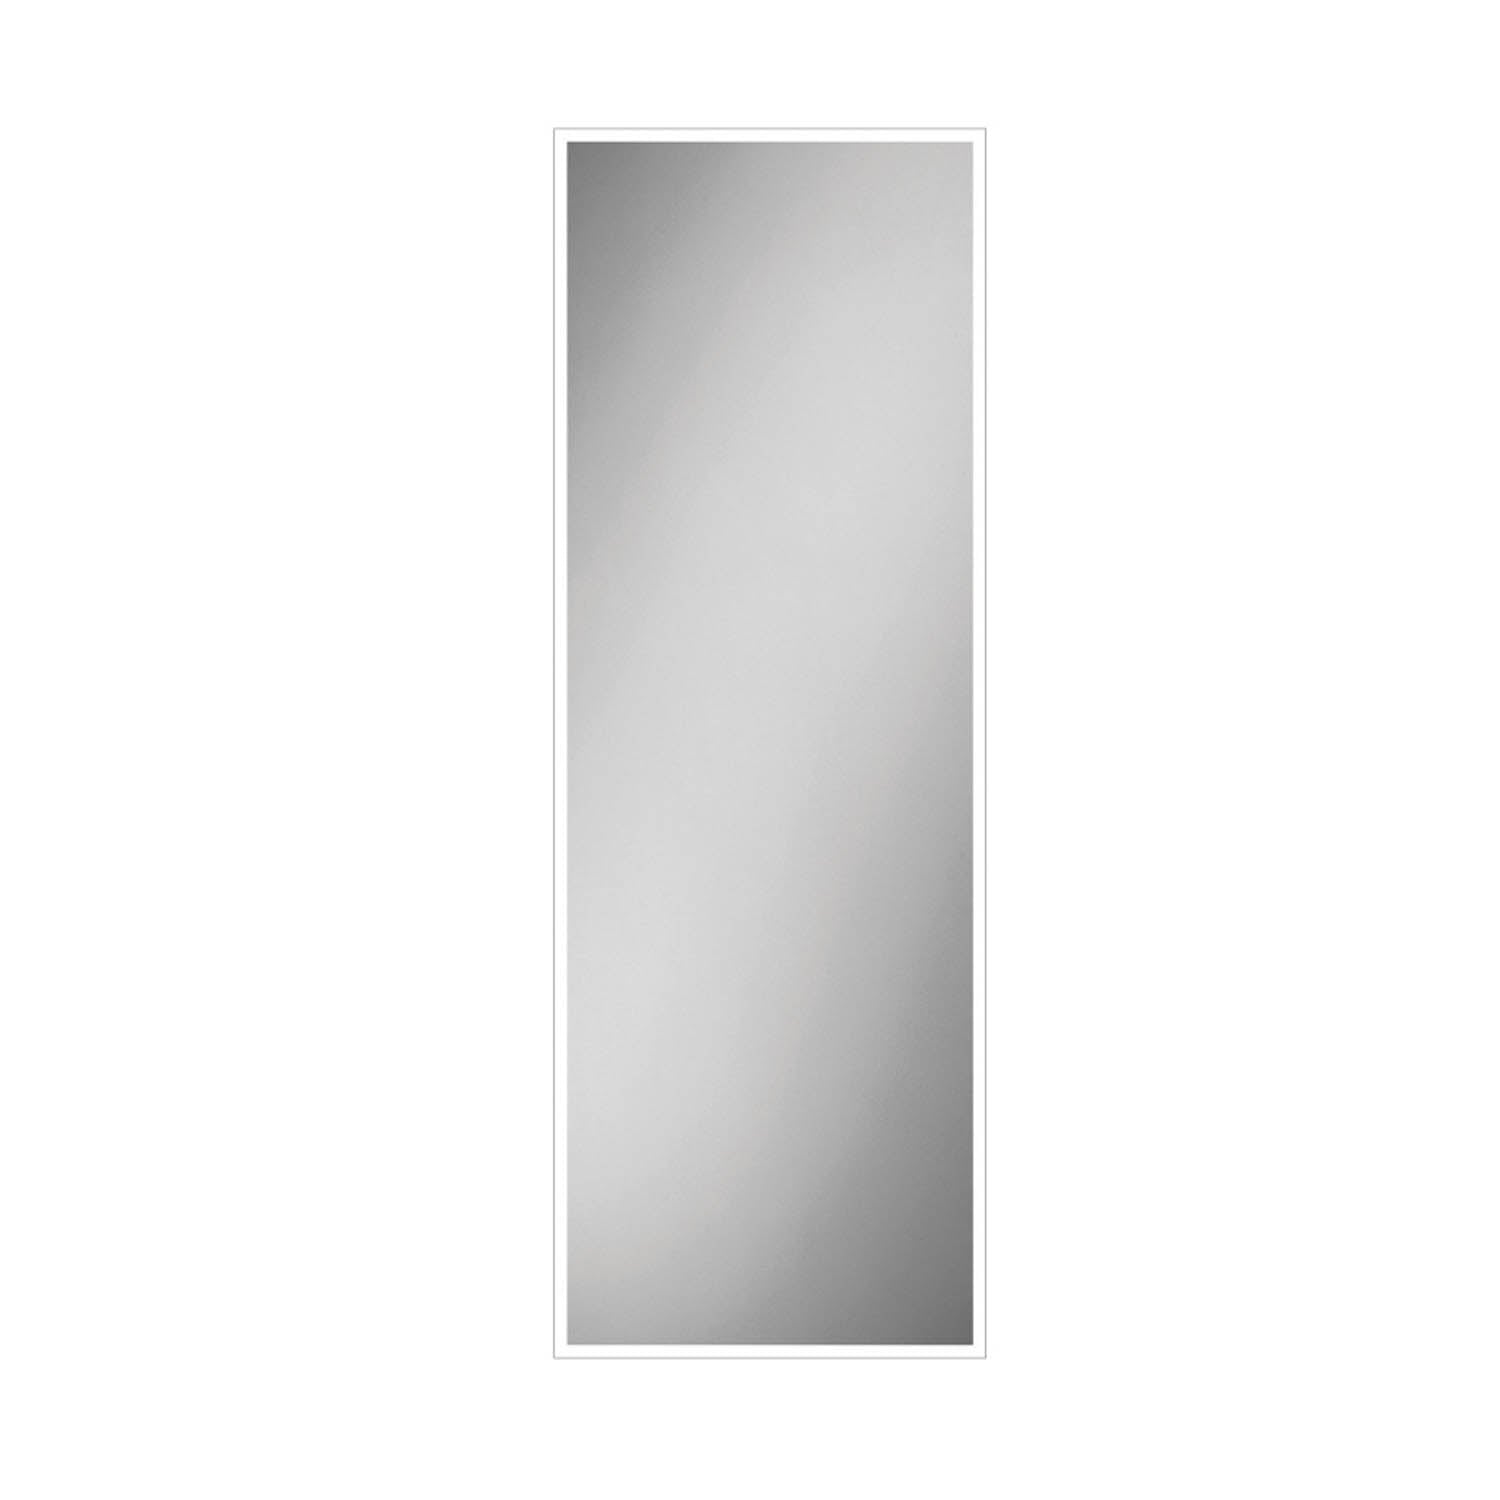 1400x600mm Front Lit LED Light Mirror on a white background